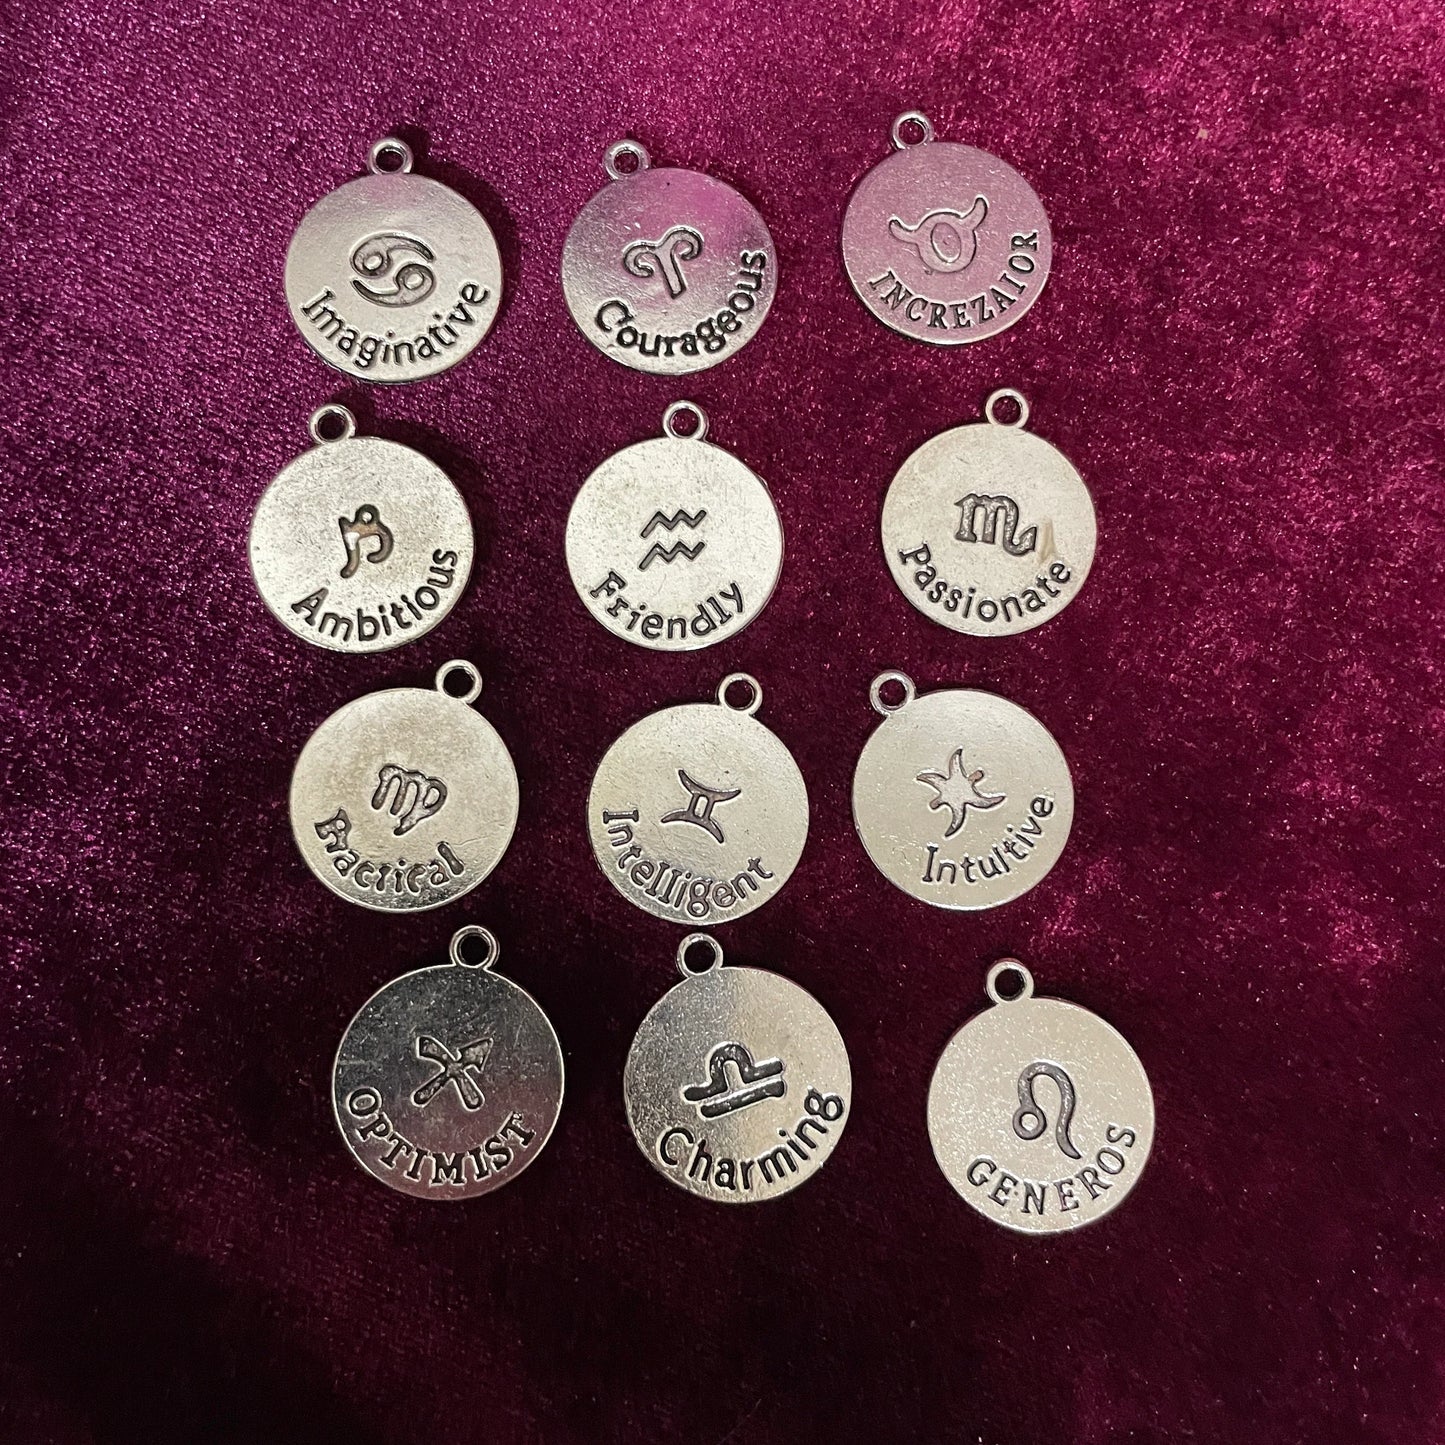 Add on kit of 50 tea leaf reading charms for divination. Includes guidebook.